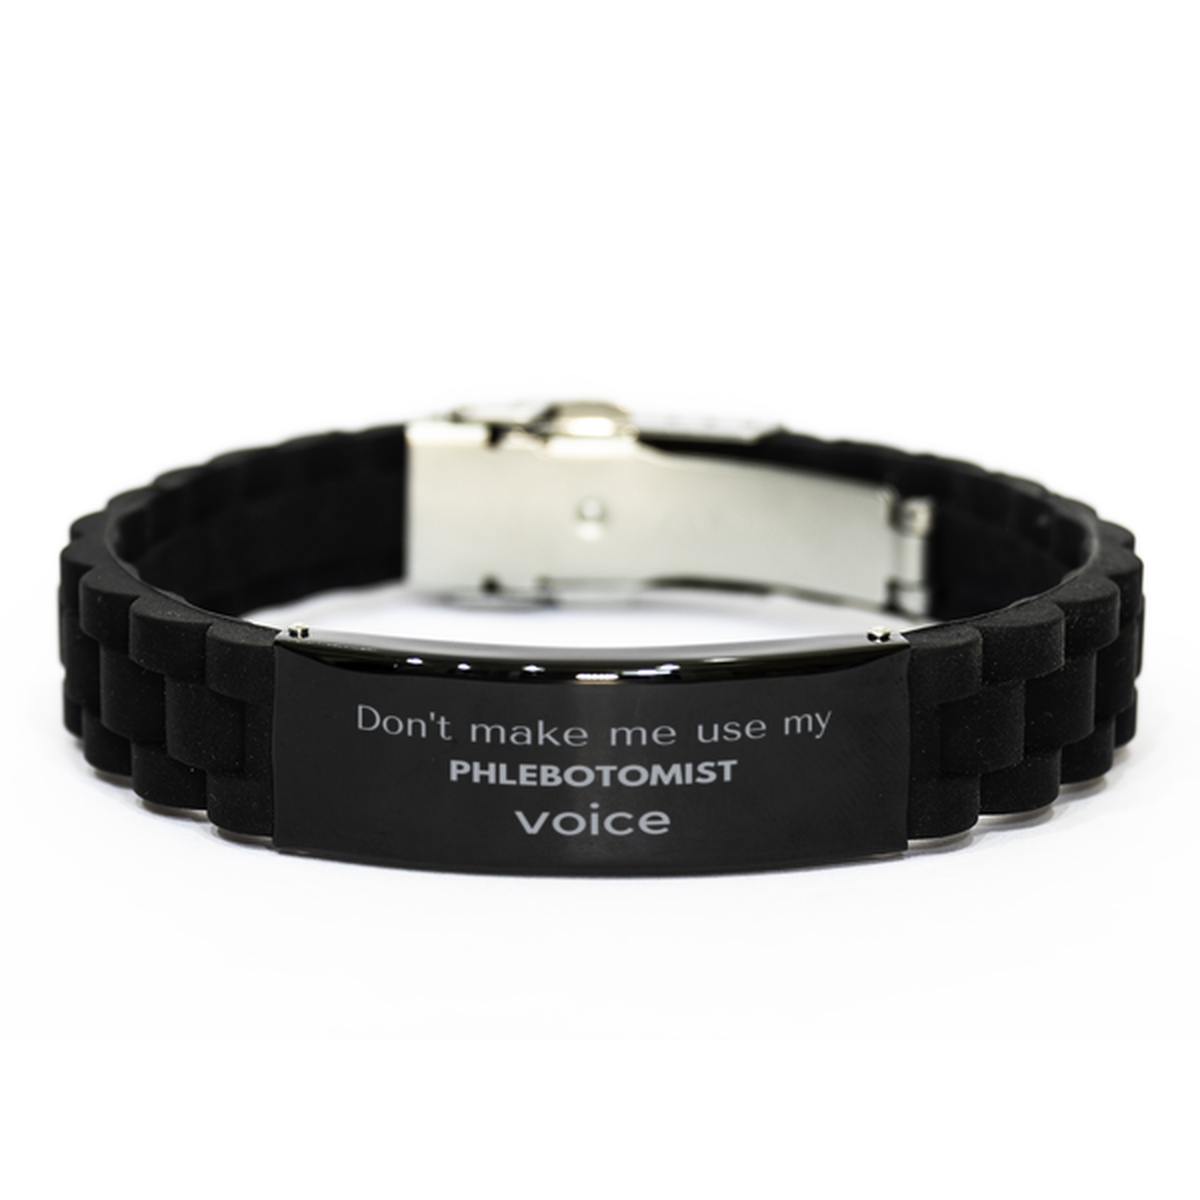 Don't make me use my Phlebotomist voice, Sarcasm Phlebotomist Gifts, Christmas Phlebotomist Black Glidelock Clasp Bracelet Birthday Unique Gifts For Phlebotomist Coworkers, Men, Women, Colleague, Friends